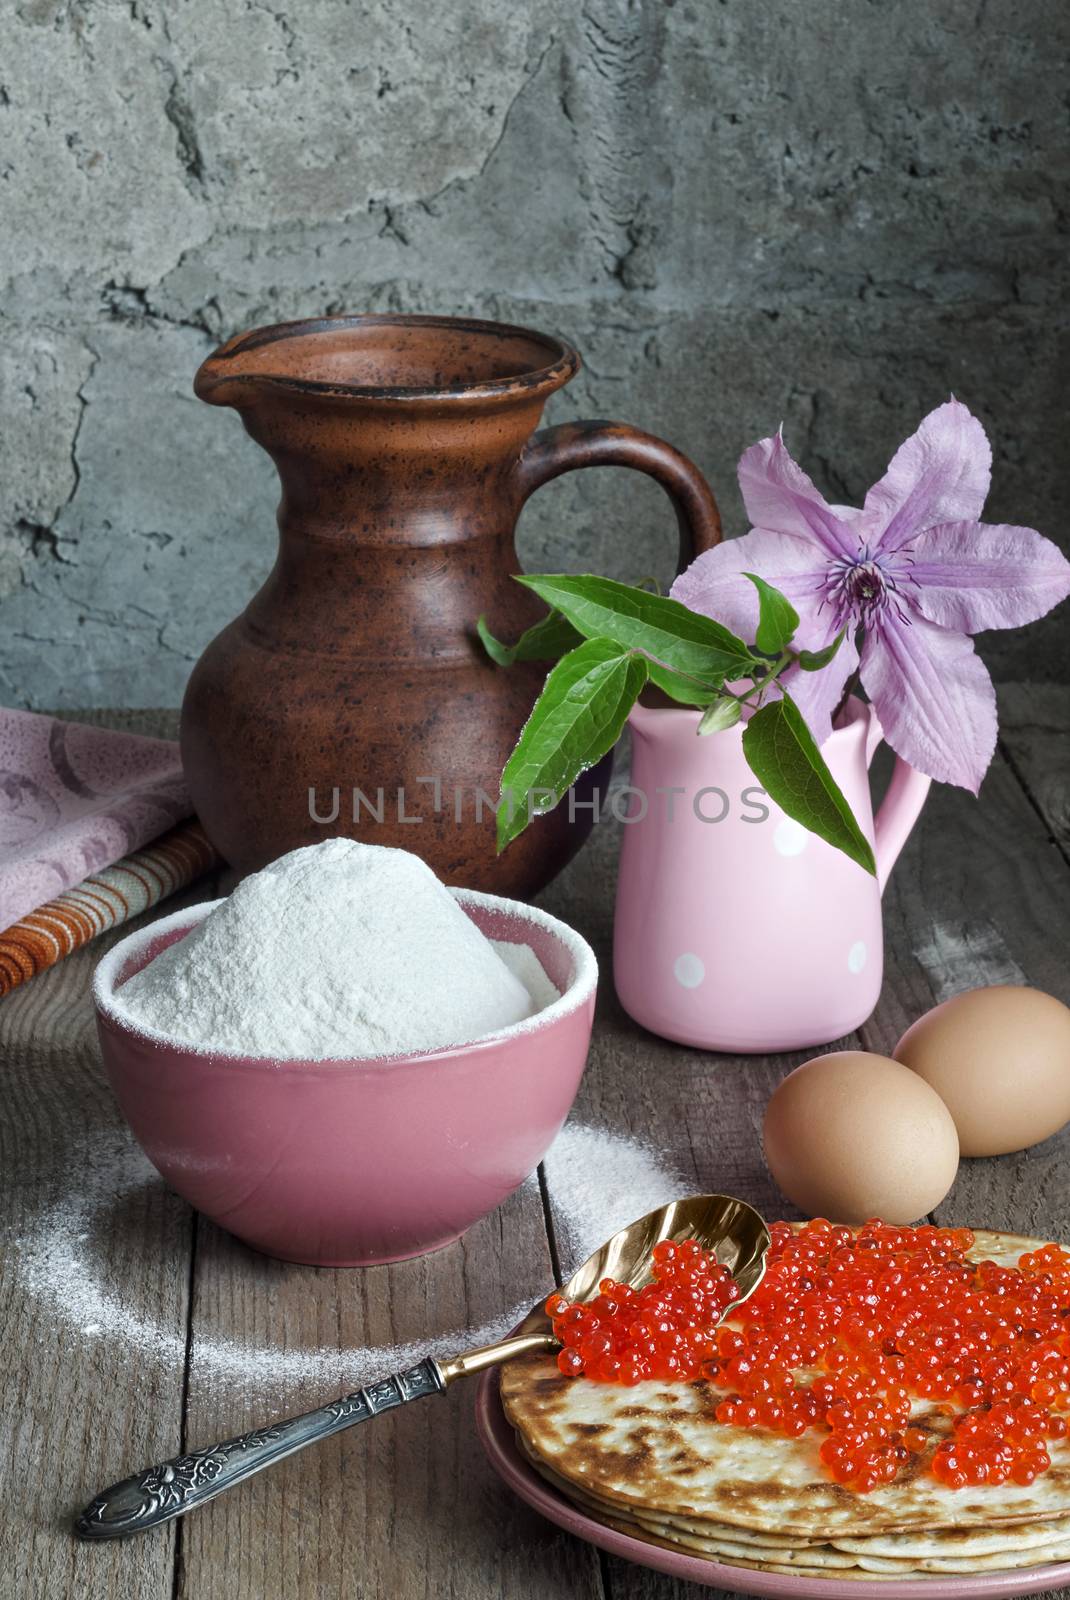 Pancakes with red caviar on a plate. Antique caviar spoon. In a bowl, flour, and eggs on a grey background and rough wooden surface. A pitcher and a vase with flowers in the background.